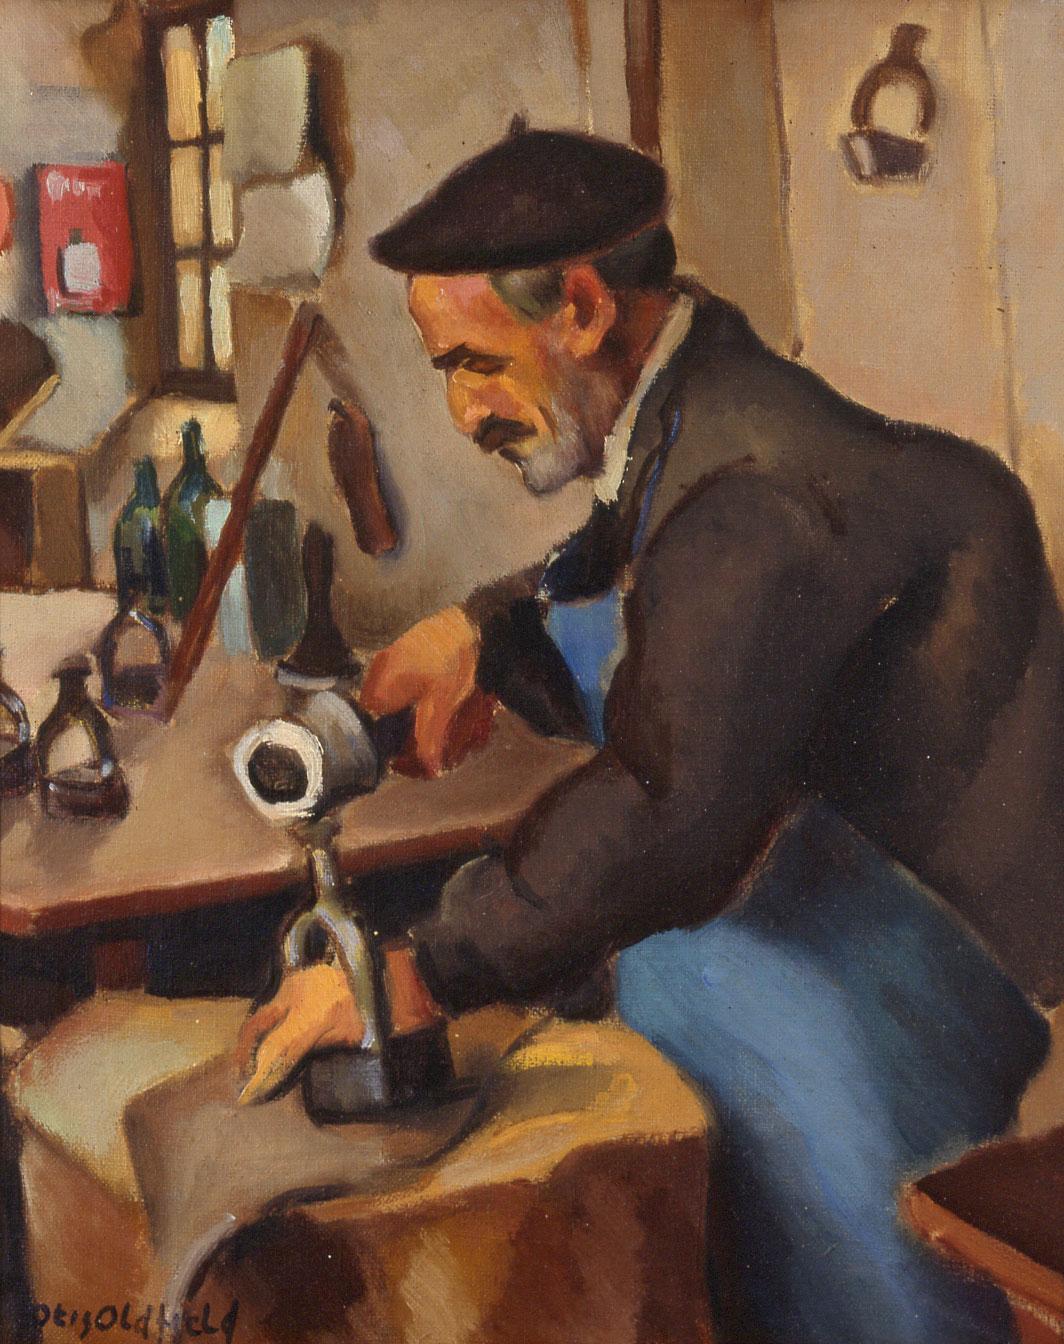 Otis Oldfield Figurative Painting - "Old Shoemaker" Ashcan 20th Century Modernism 1924 California WPA Realism Worker